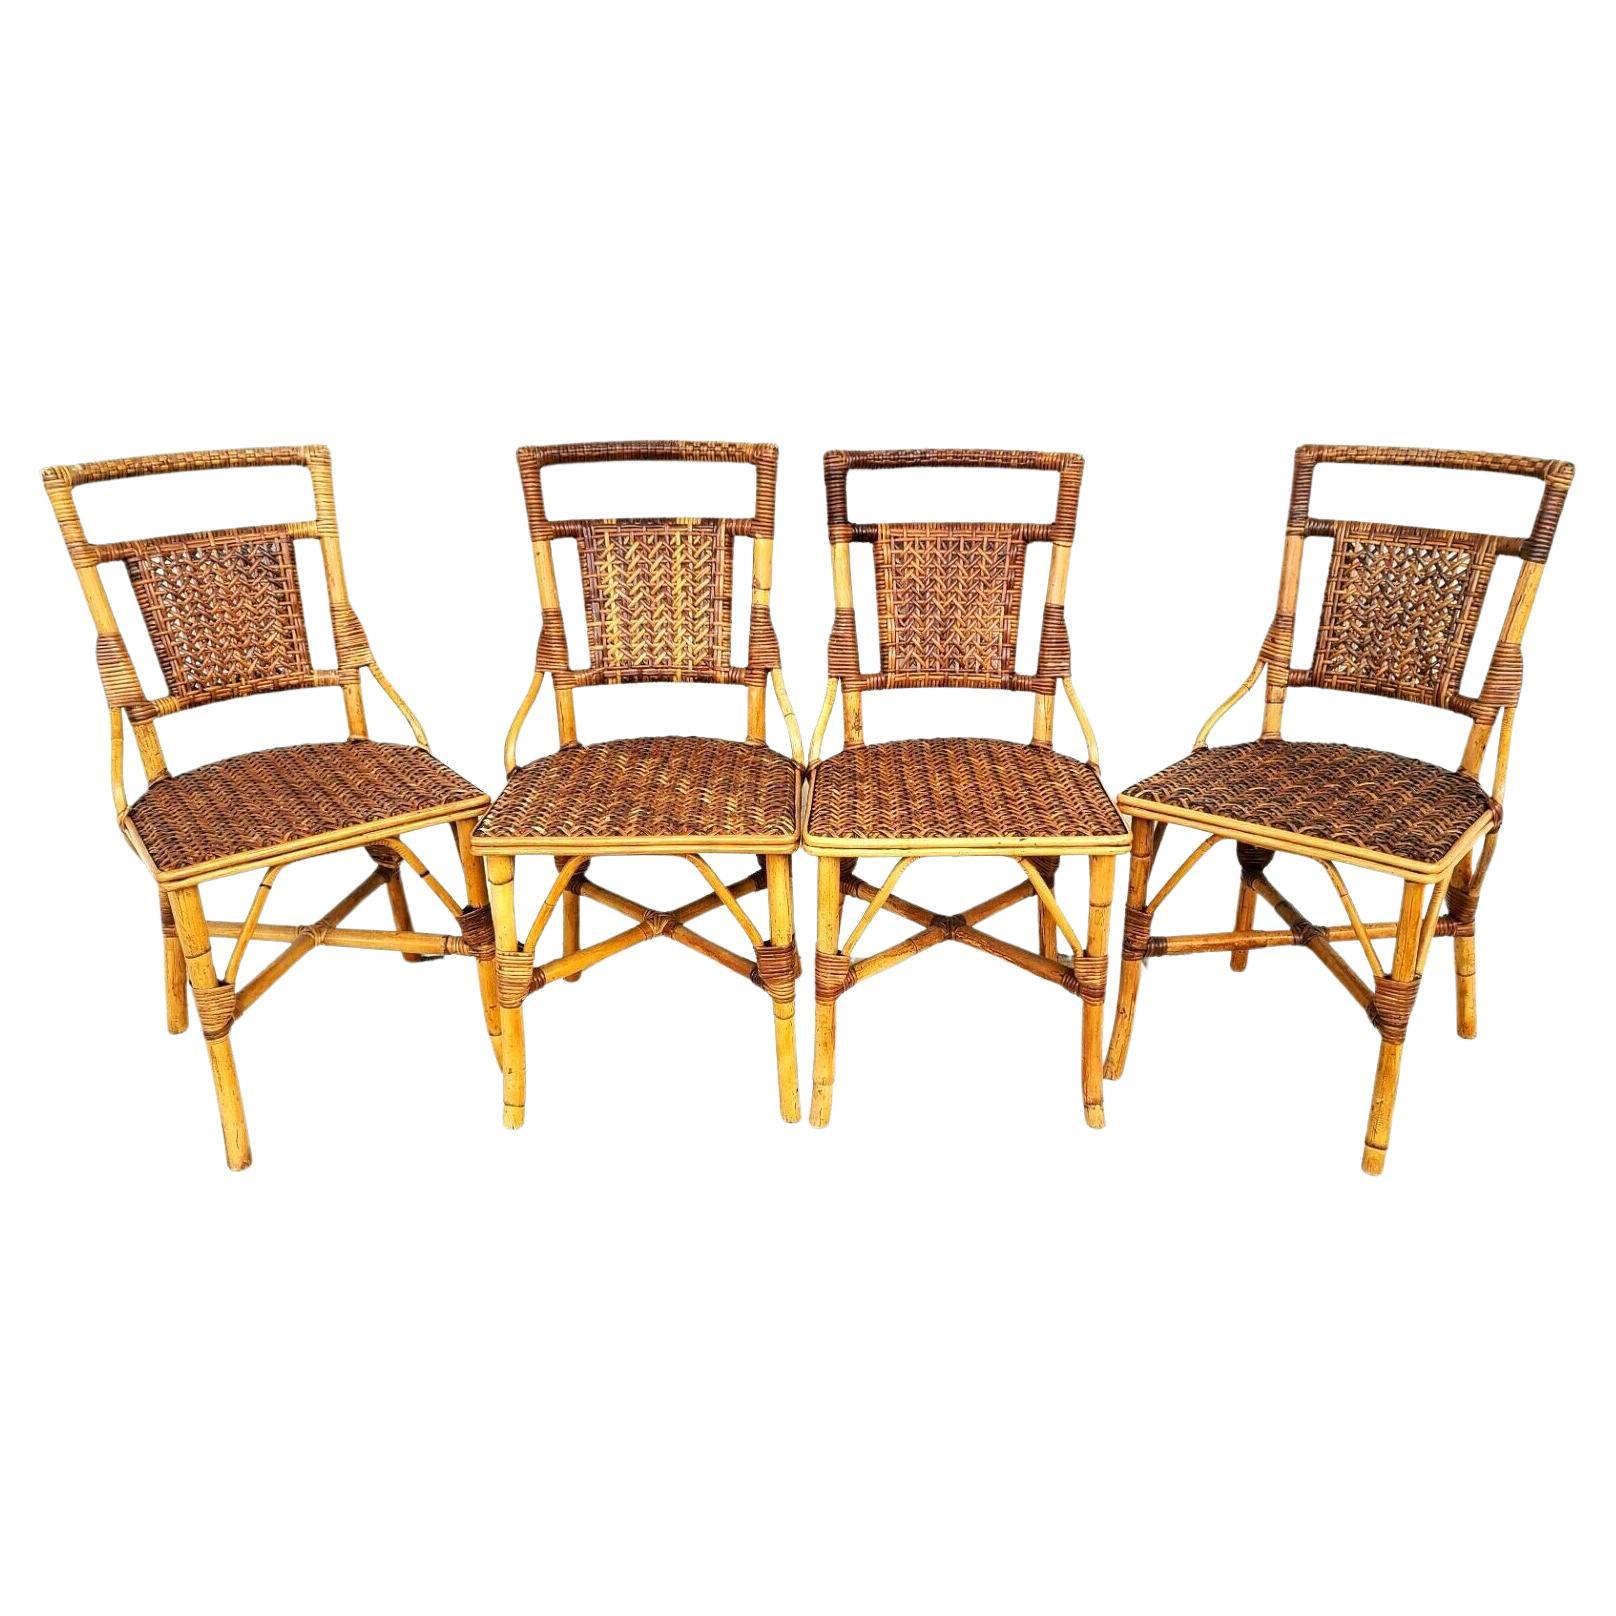 Vintage French Style Bamboo Rattan Wicker Dining Chairs, Set of 4